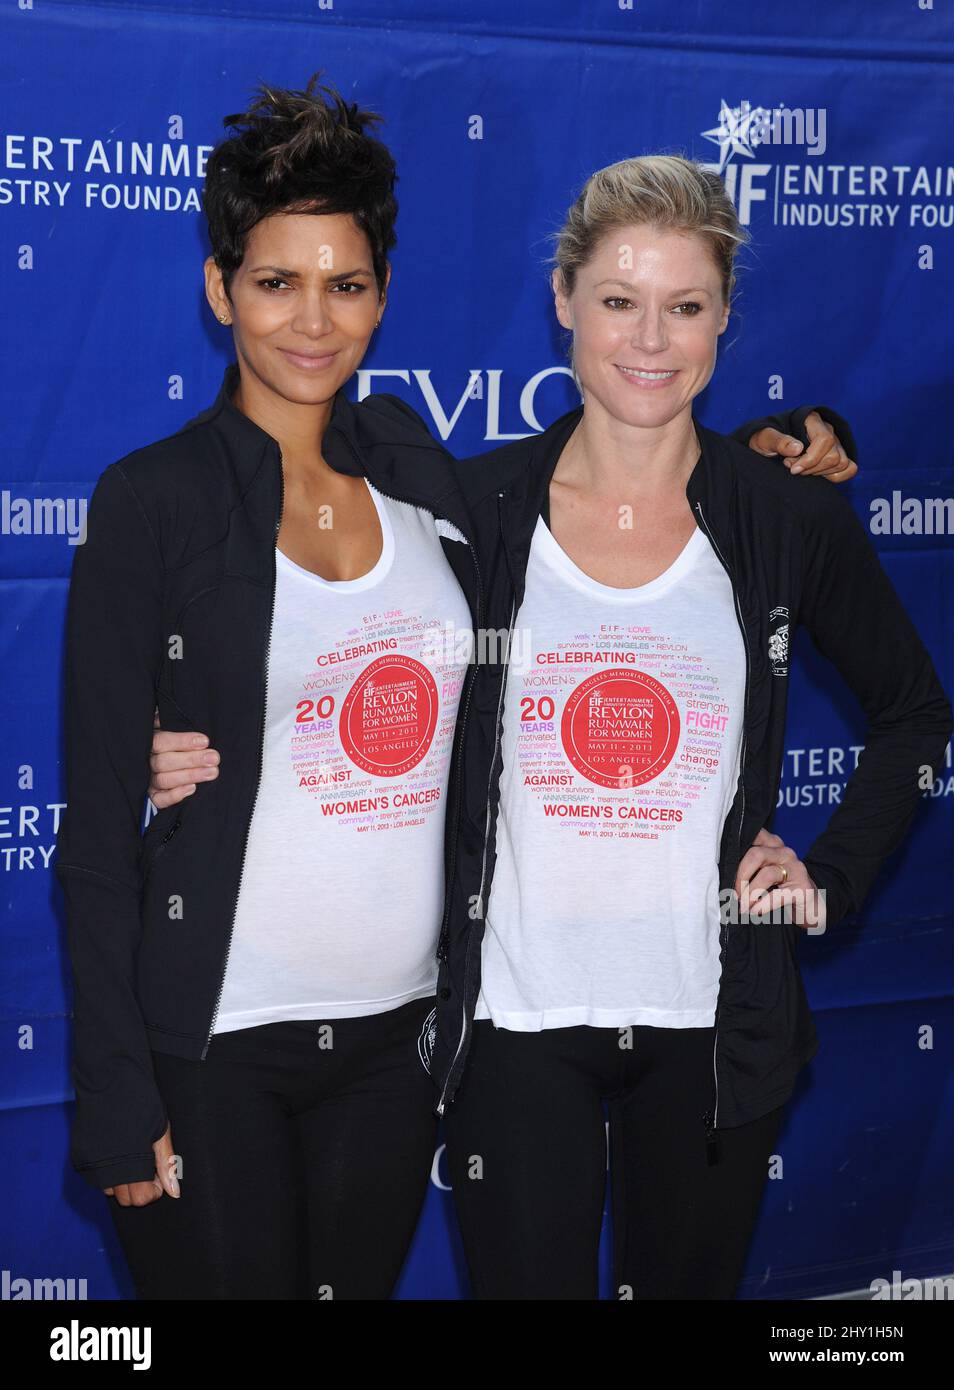 Halle Berry and Julie Bowen arriving for the 20th Annual Revlon Run/Walk For Women Held at Los Angeles Memorial Coliseum Stock Photo